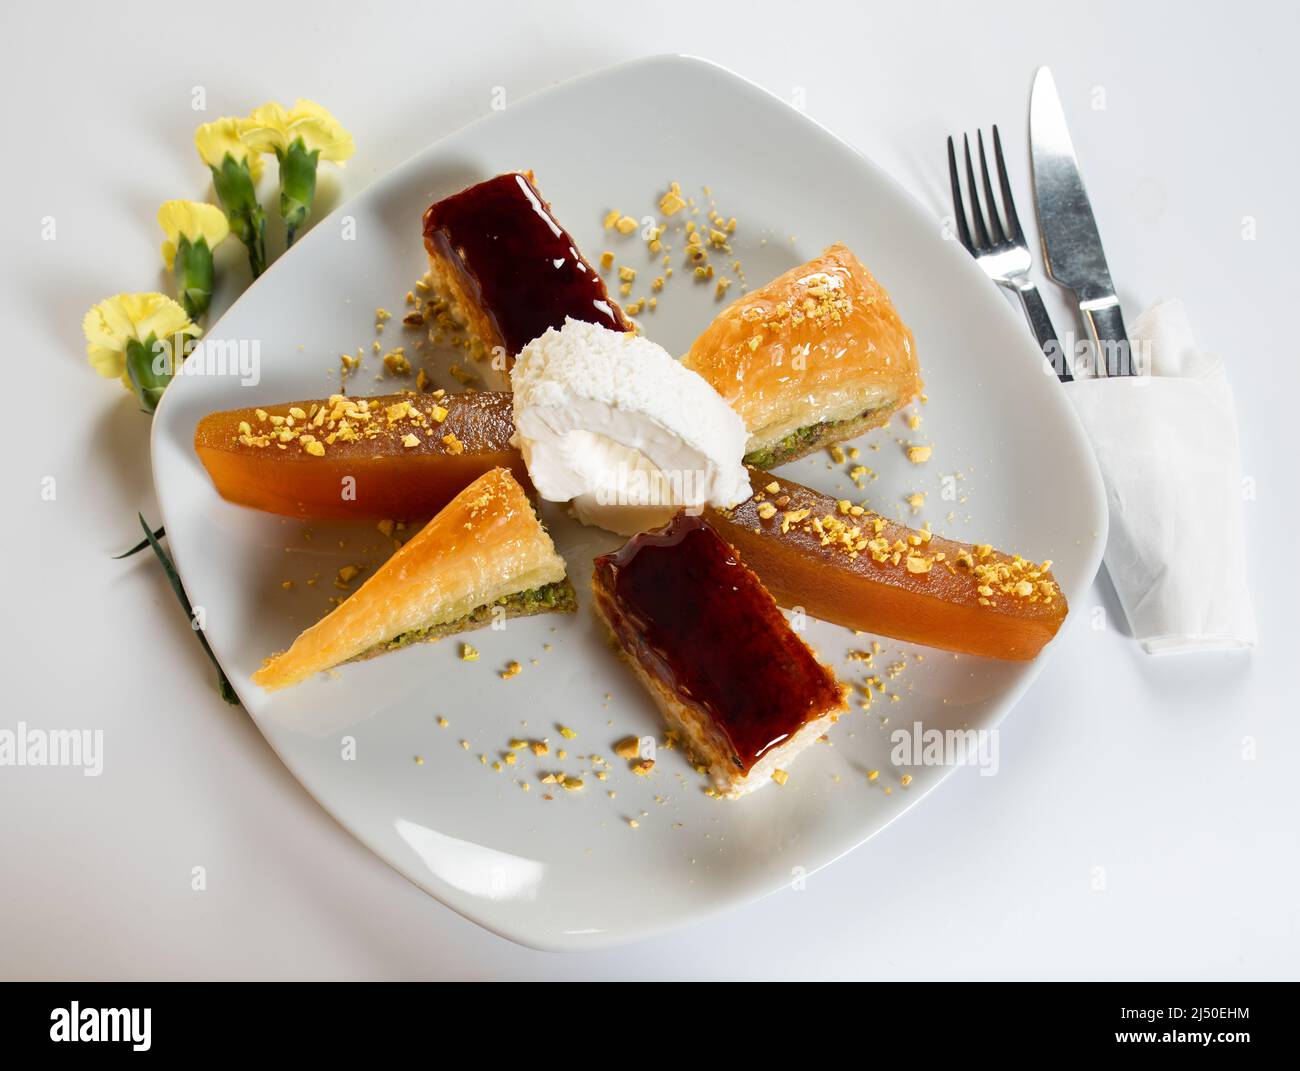 Mixed dessert plate in Turkish cuisine. Slices of Baklava, Trilece and Pumpkin Dessert are in a plate. Stock Photo